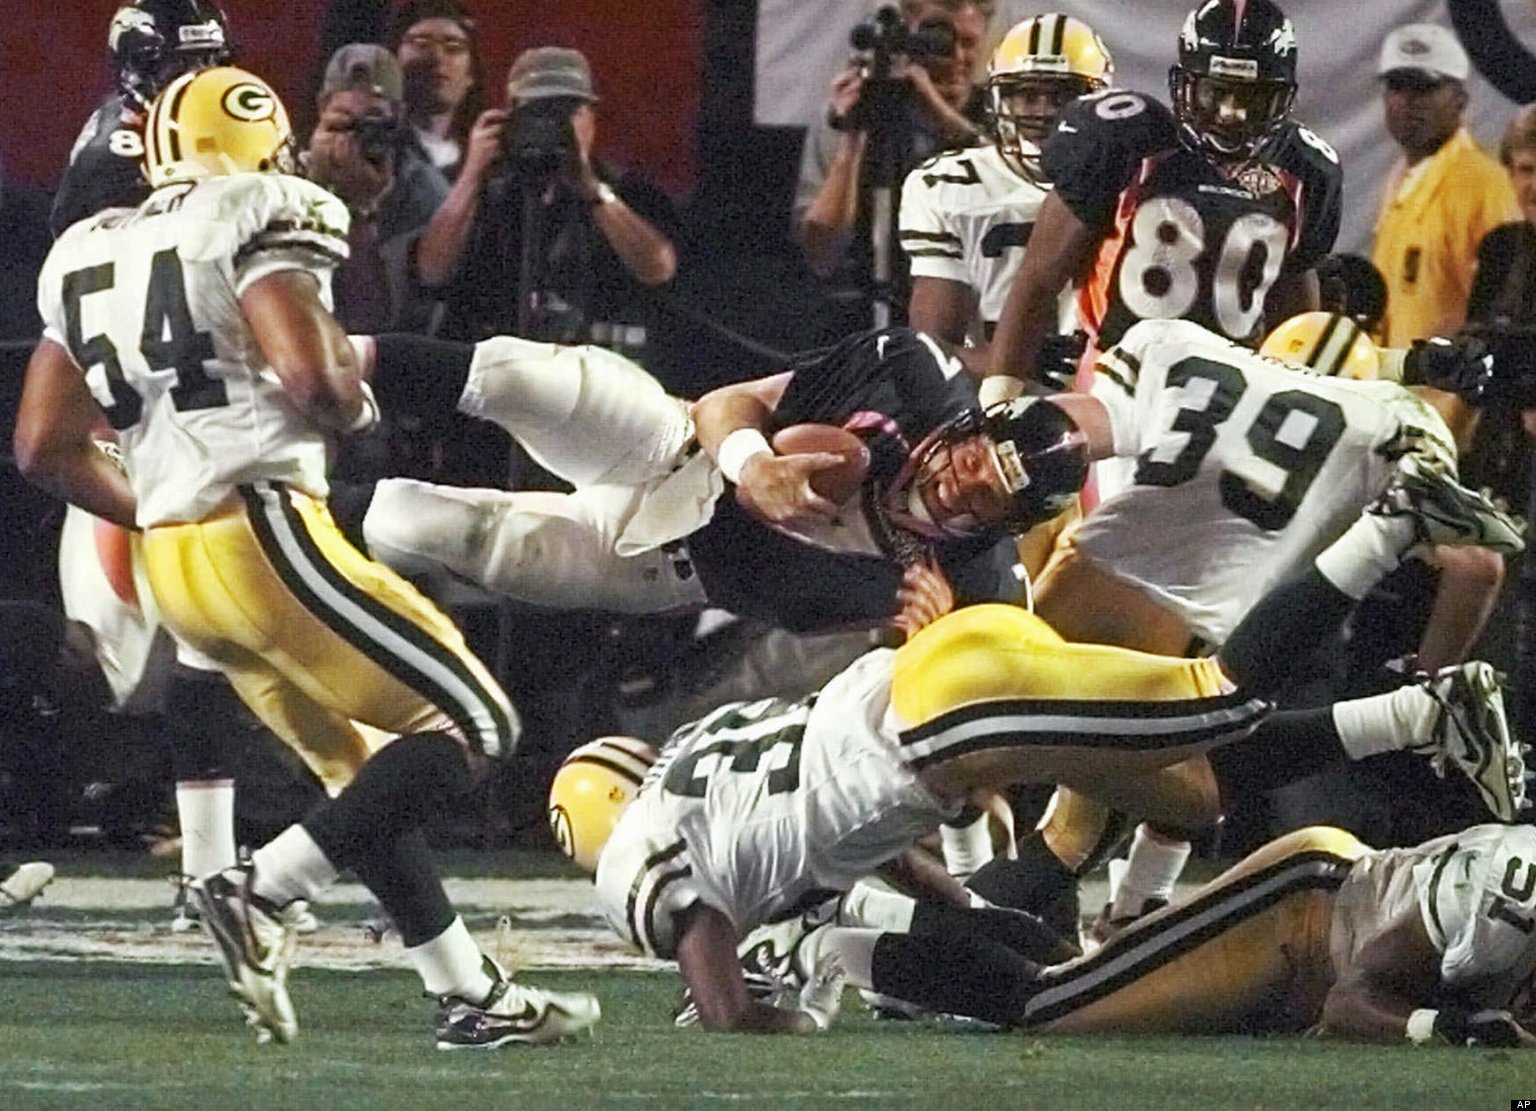 Super Bowl Highlights: John Elway Helicopter Dive, Lynn Swann Catch Among Top Plays ...1536 x 1111